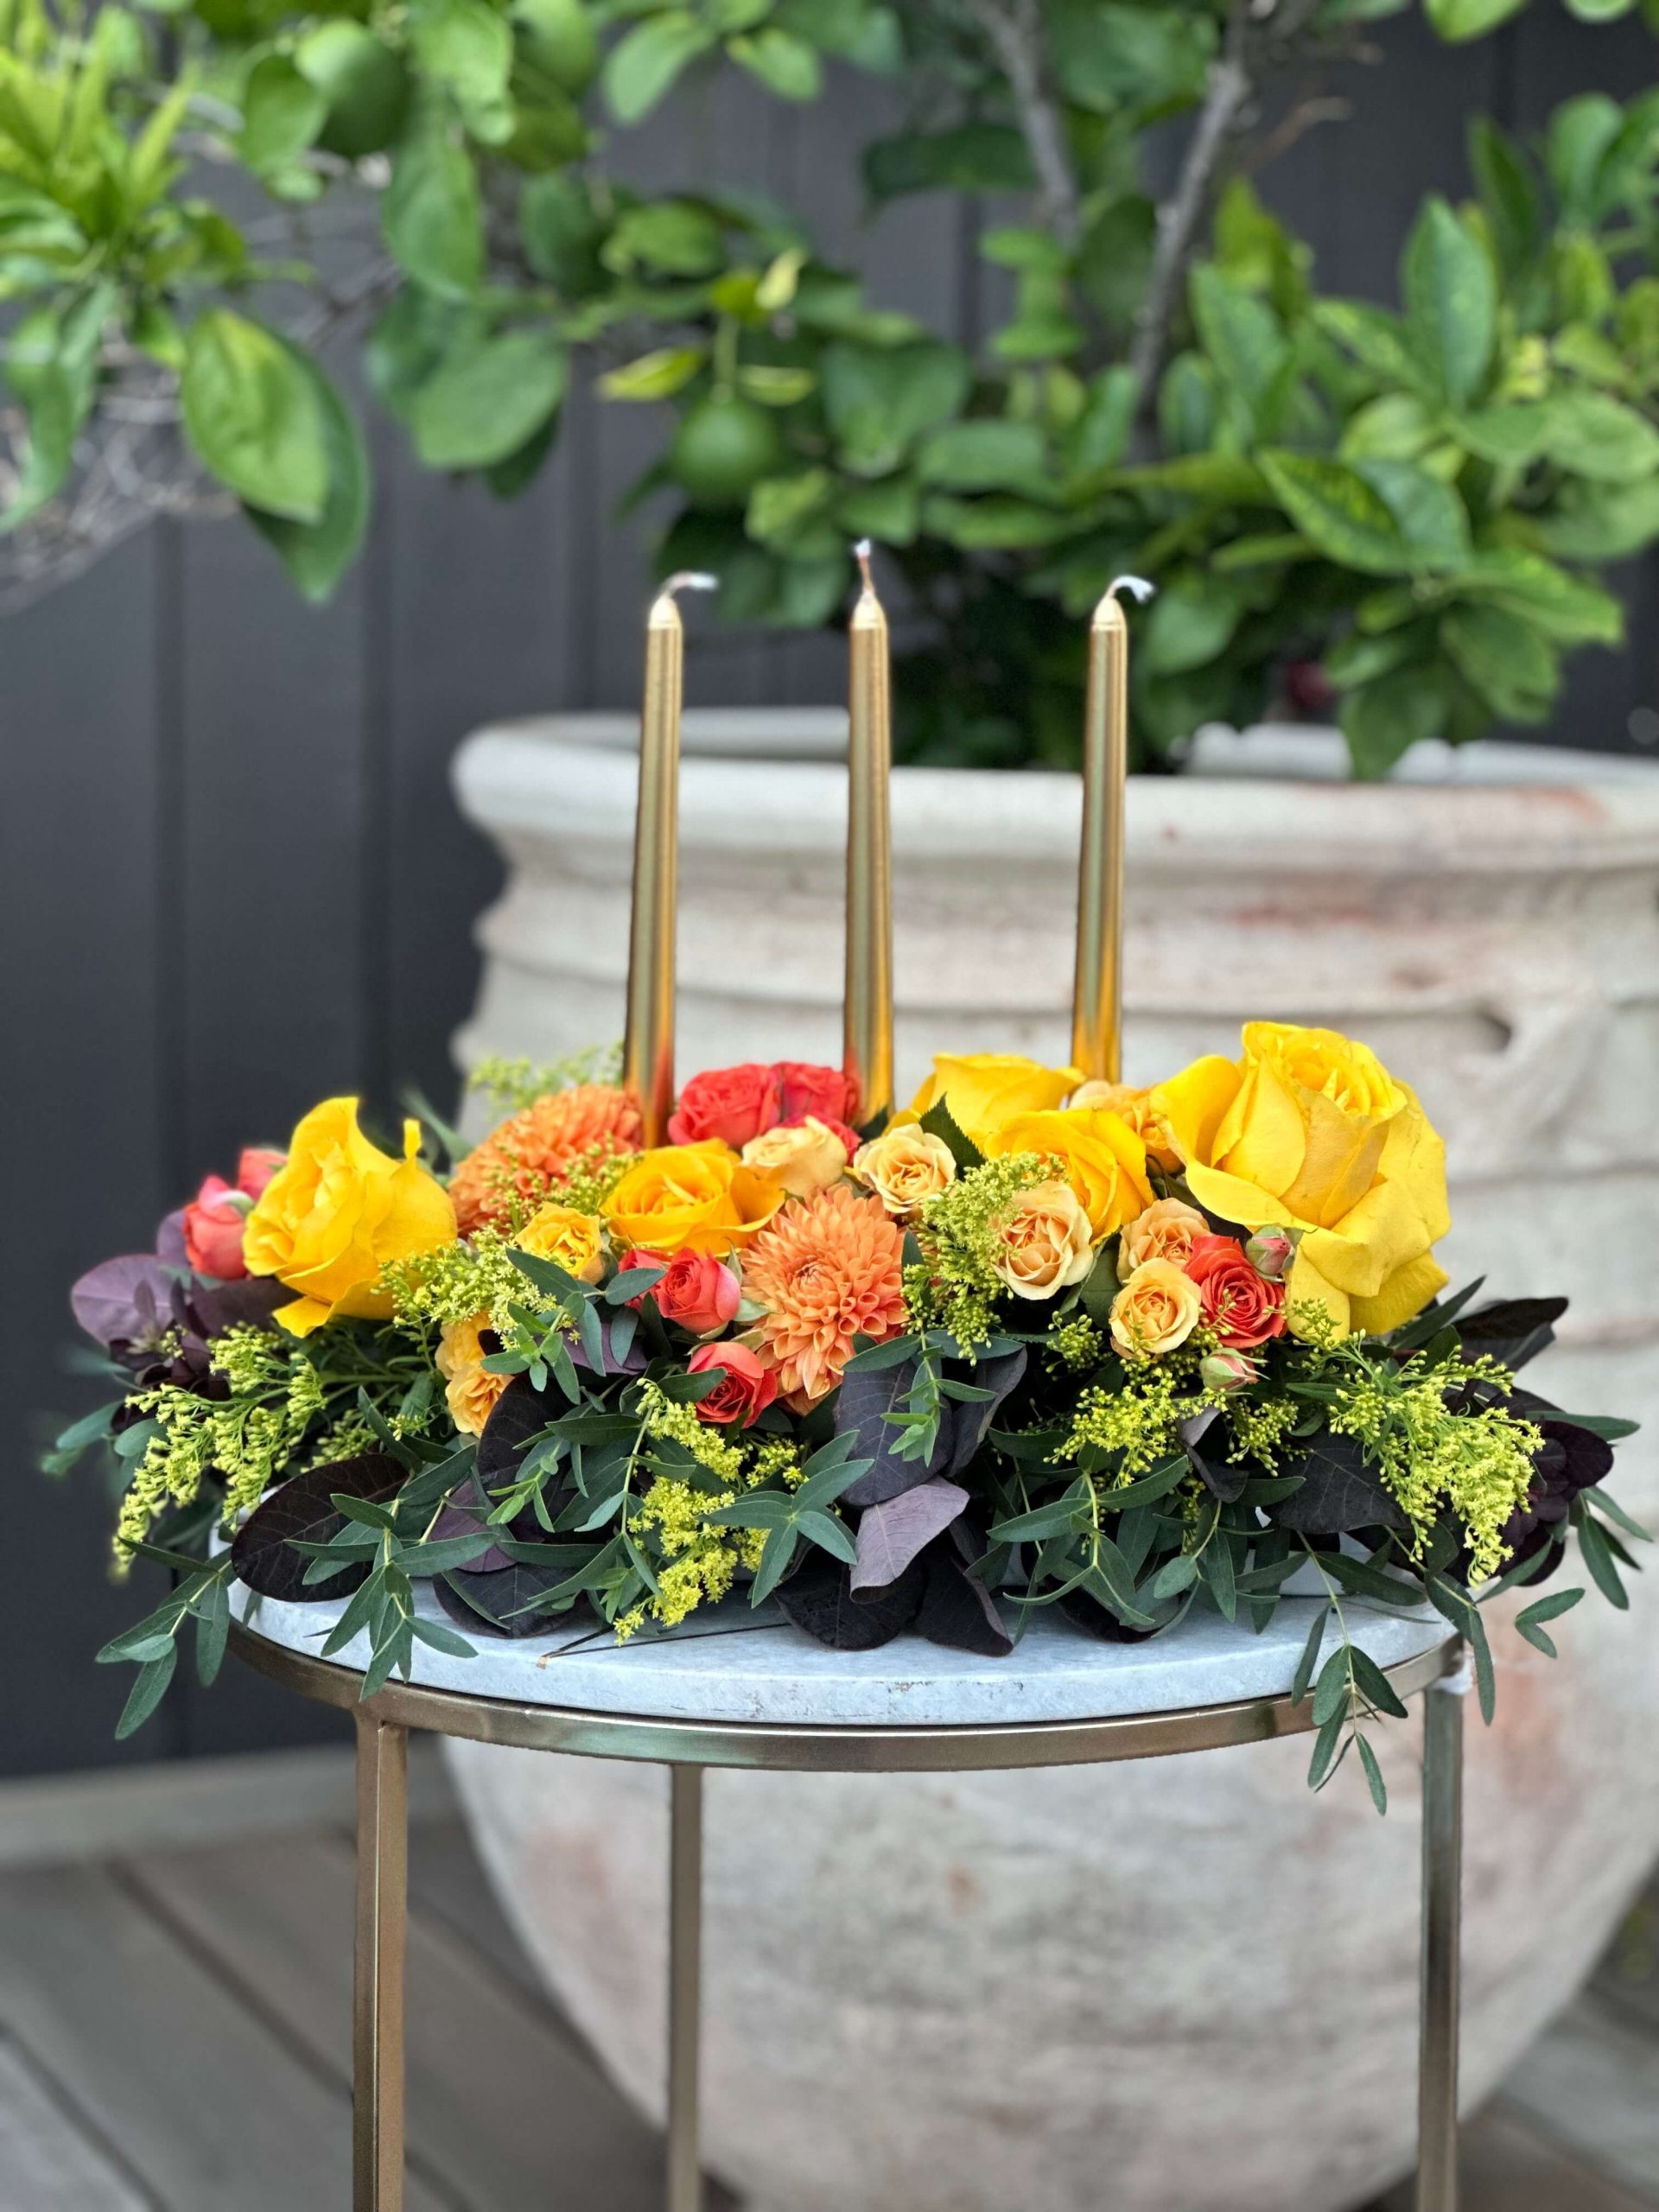 TABLE CENTERPIECE WITH CANDLES